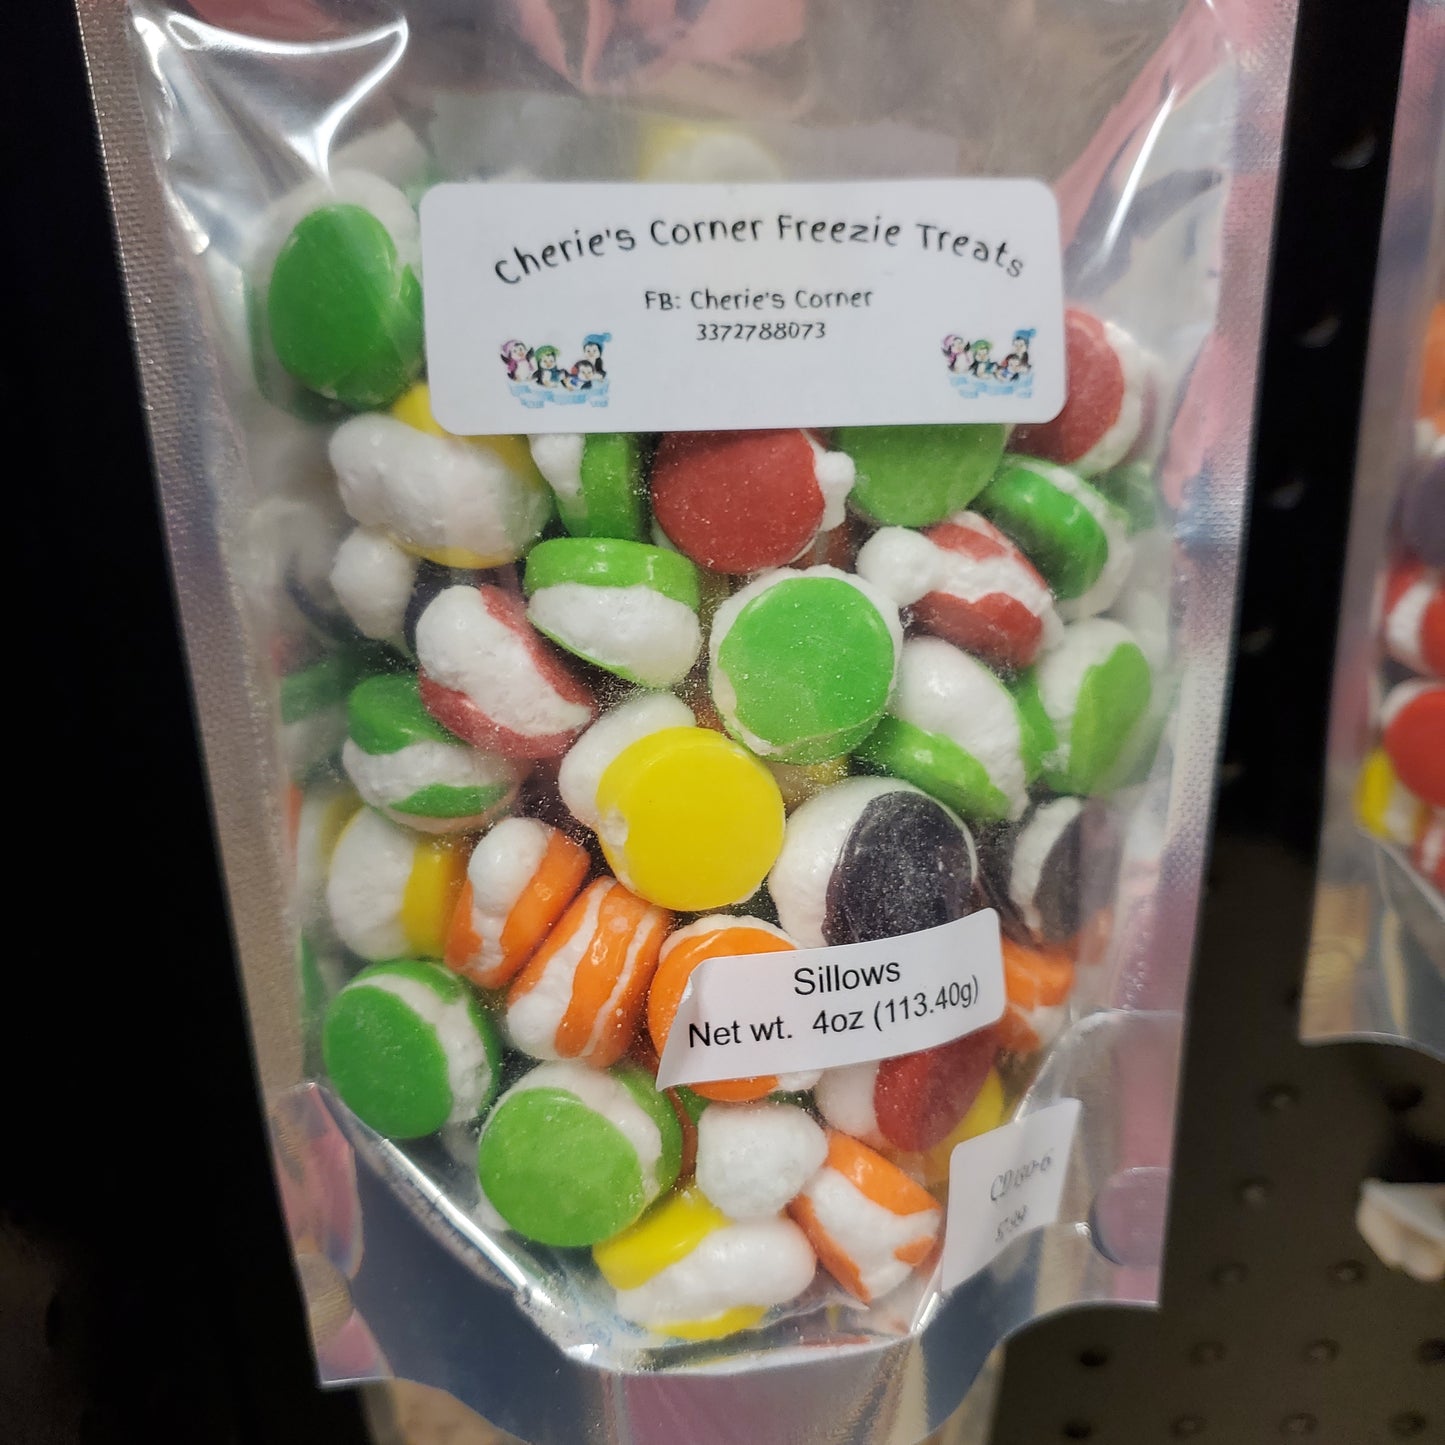 Cherie's Freeze Dried Candies